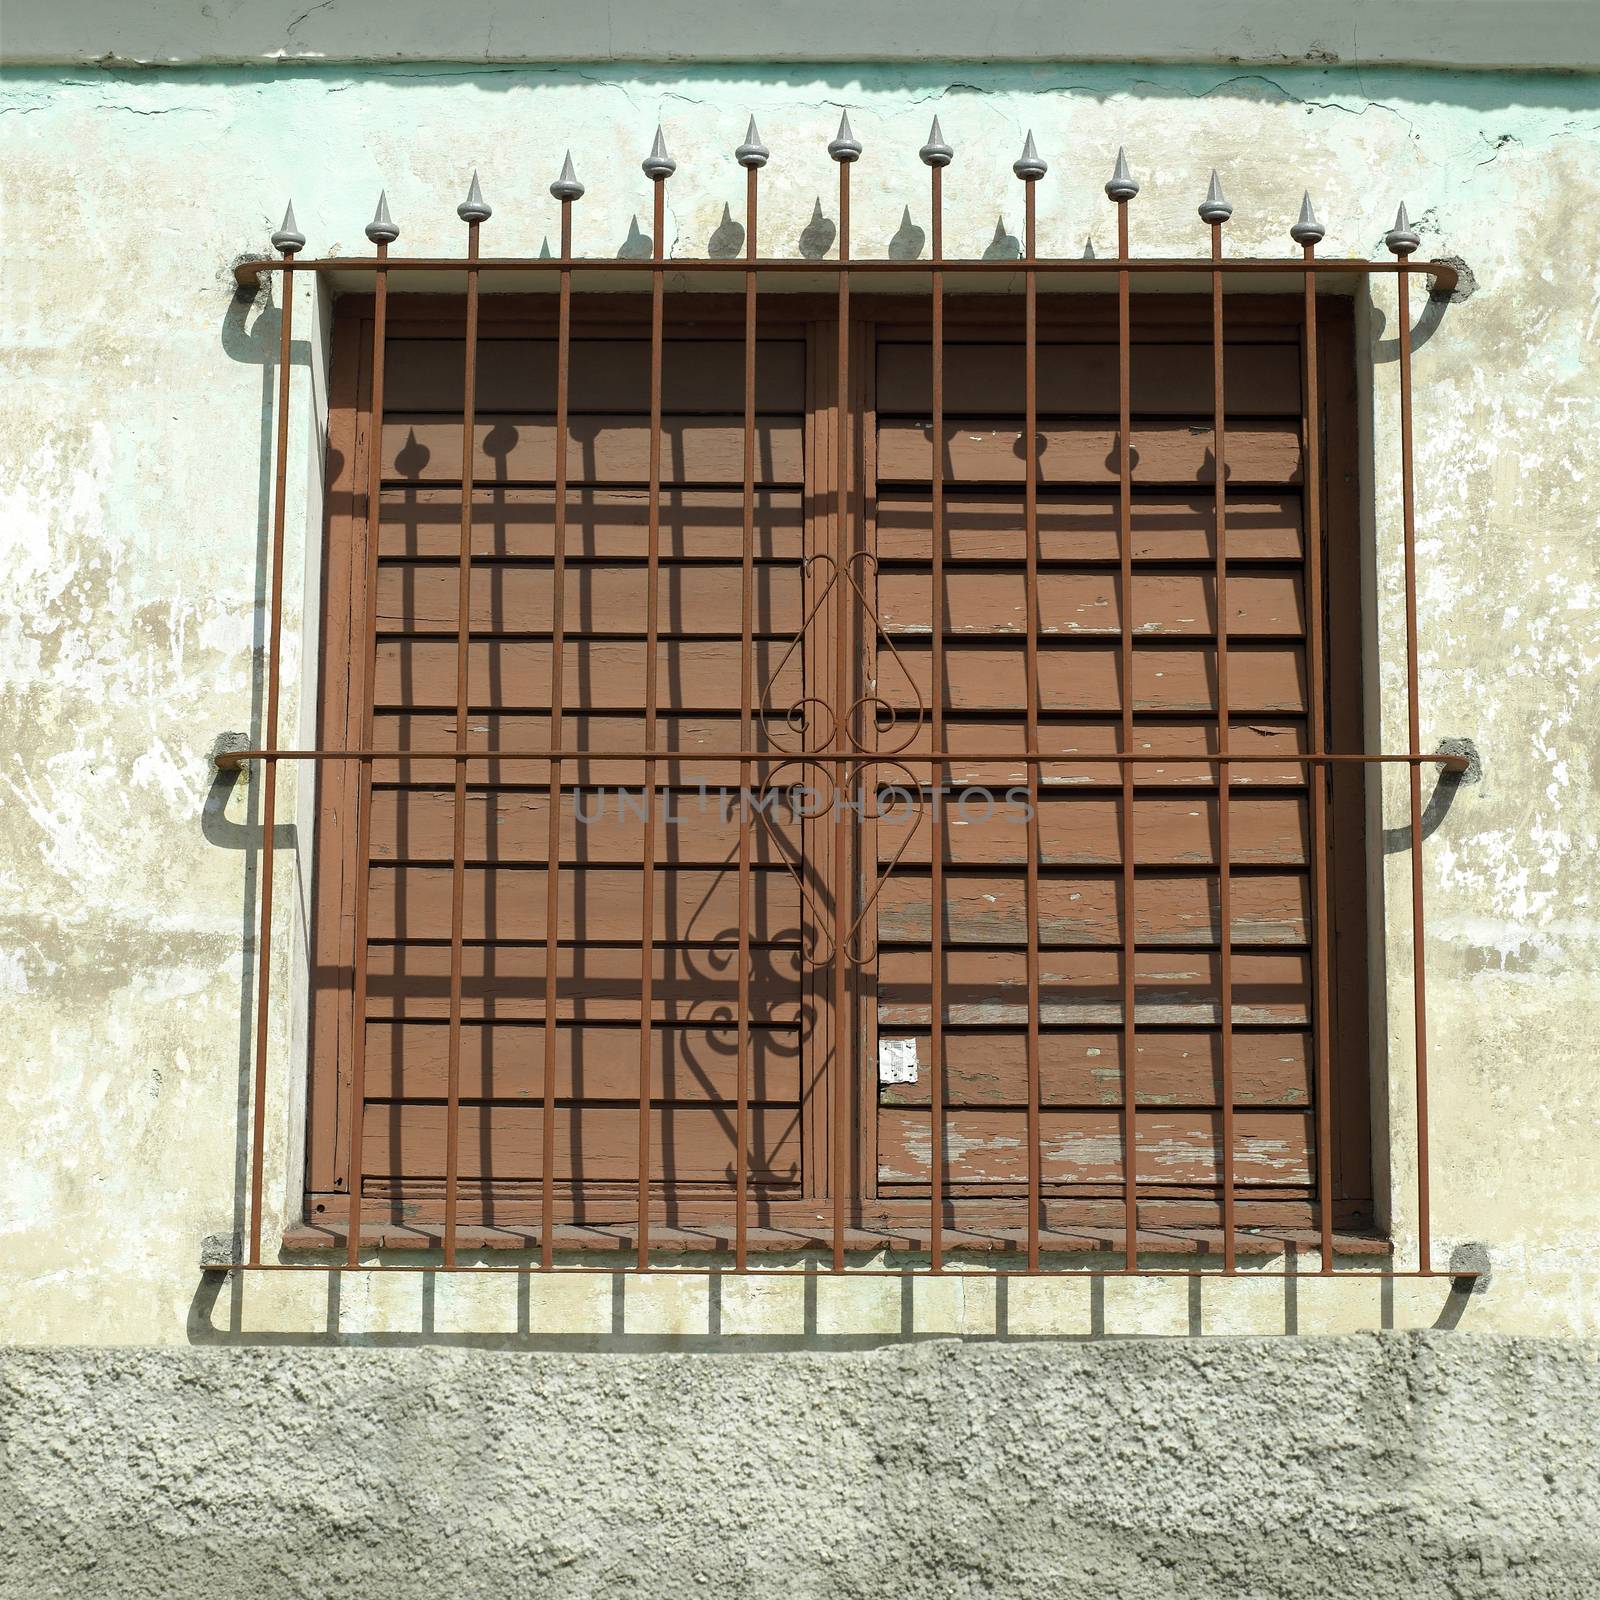 Steel bars and closed shutters of a protected window in a tropical building